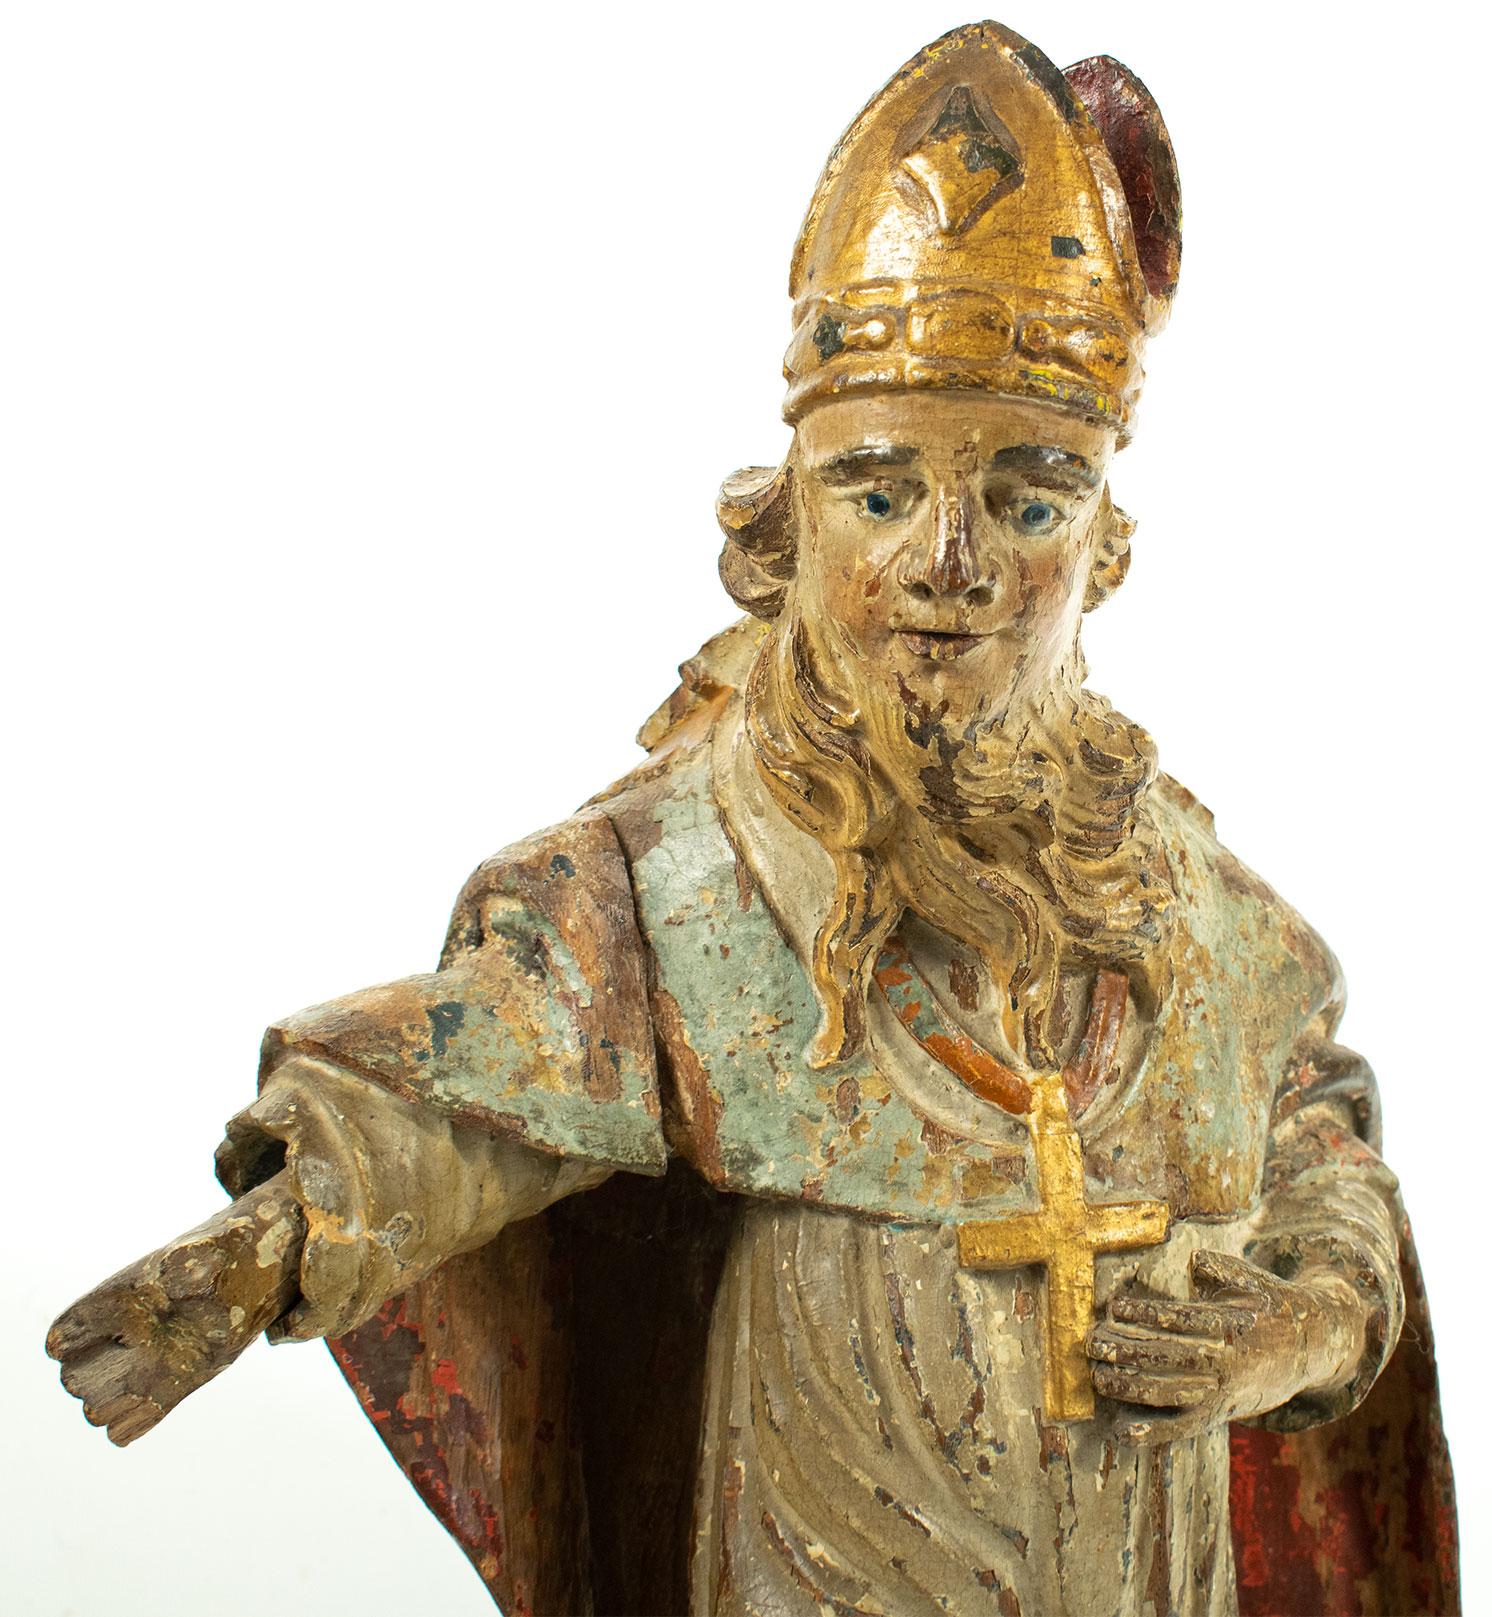 A wonderful original piece of the Renaissance Period - a carved wooden polychromed figure / statue of Saint Francis.

This piece was found in France but most probably originated in 16th century Italy.
The piece still displays the beautiful colours